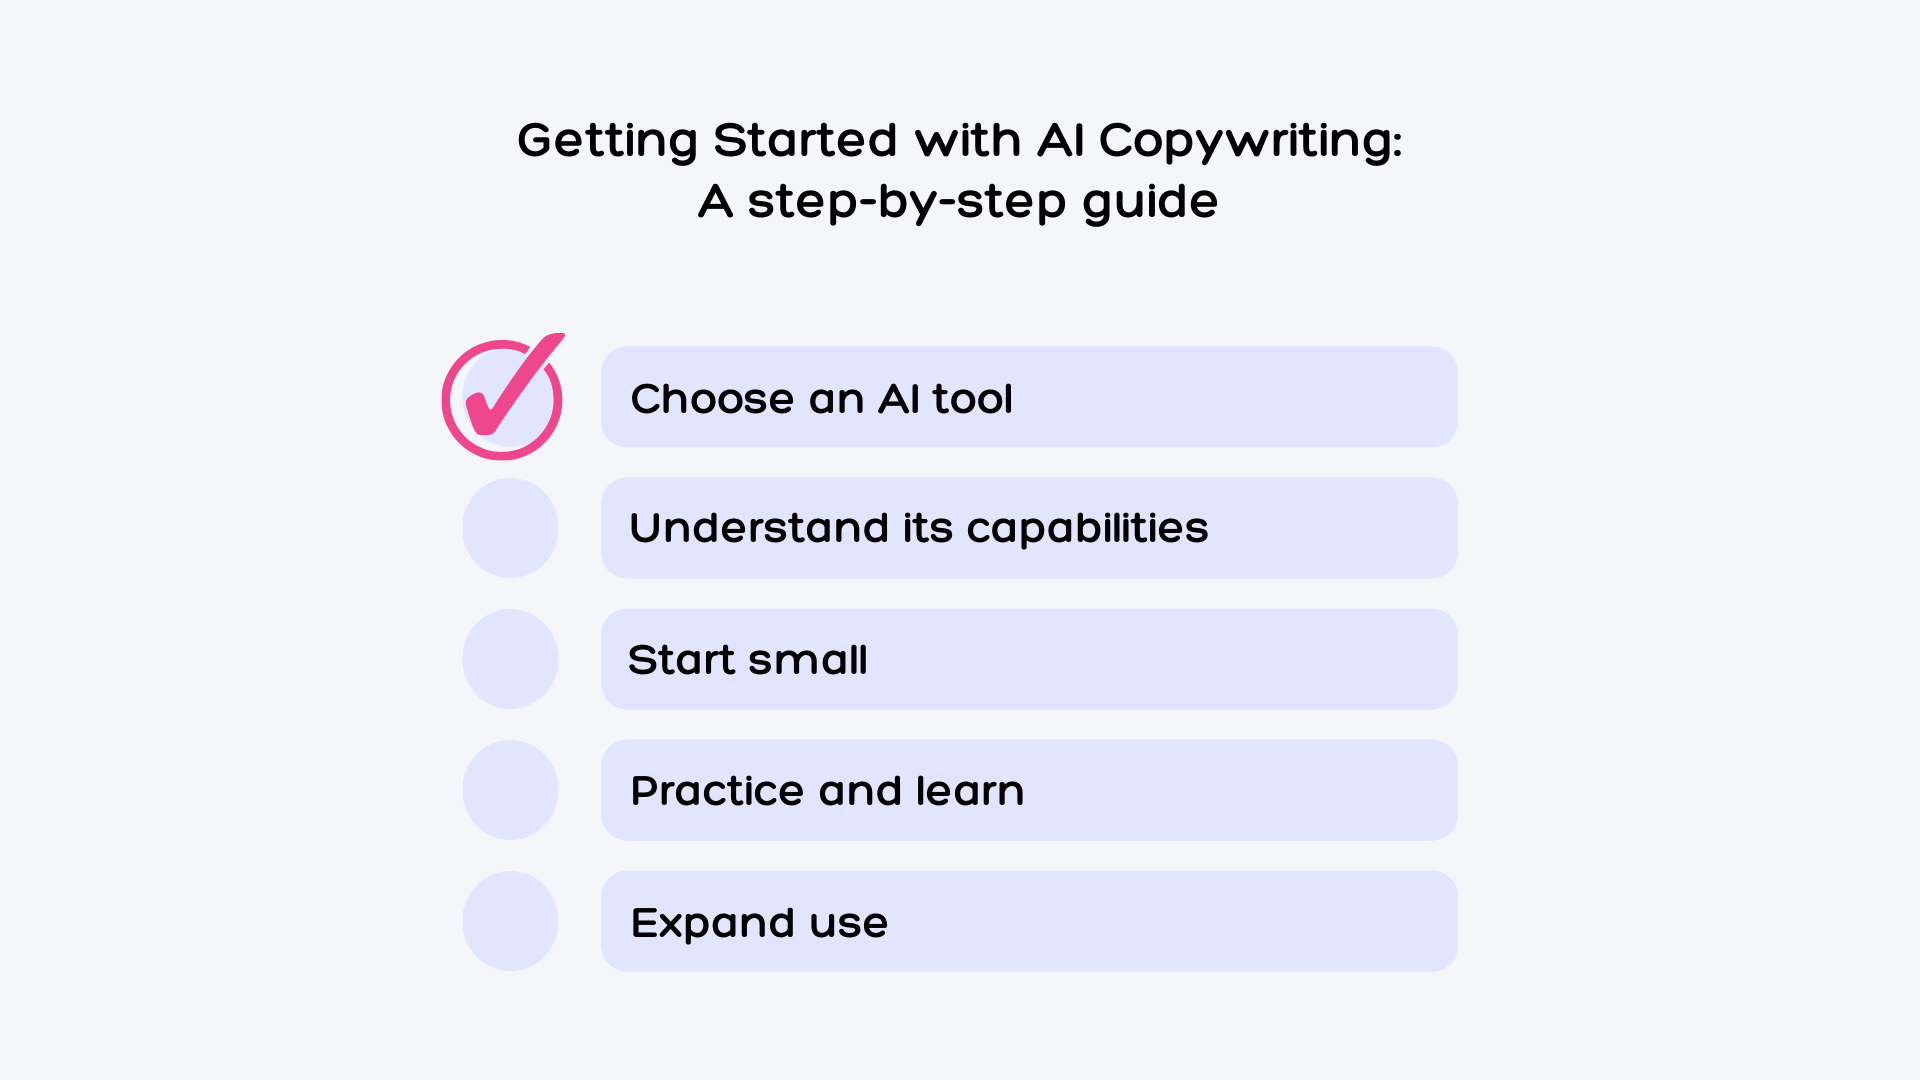 A checklist for getting started with AI copywriting